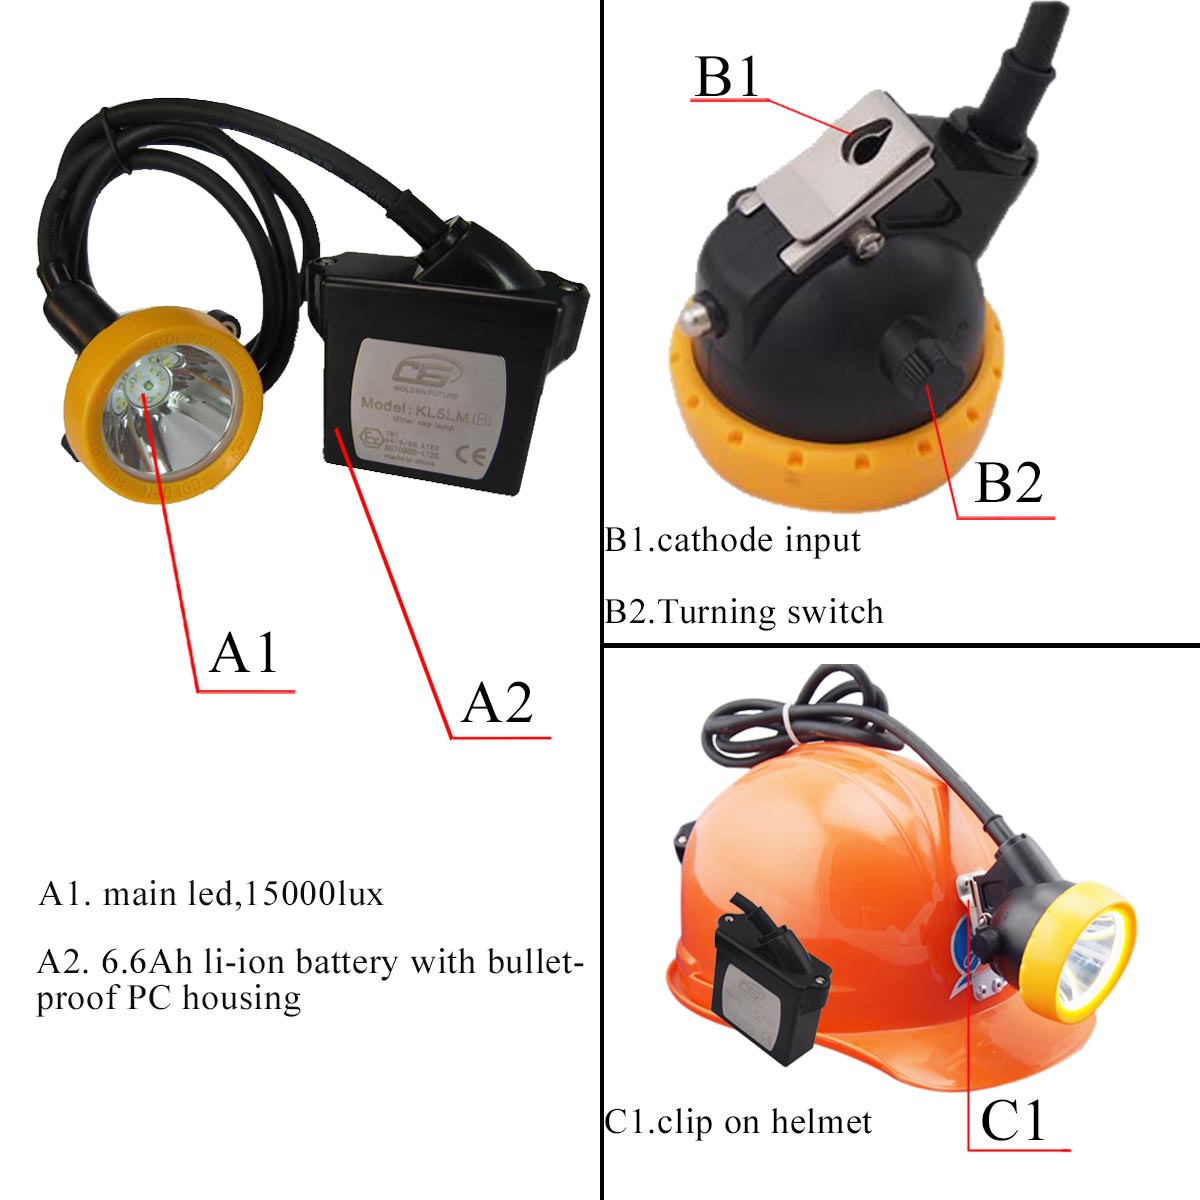 KL5LM-B miners lamp for sale